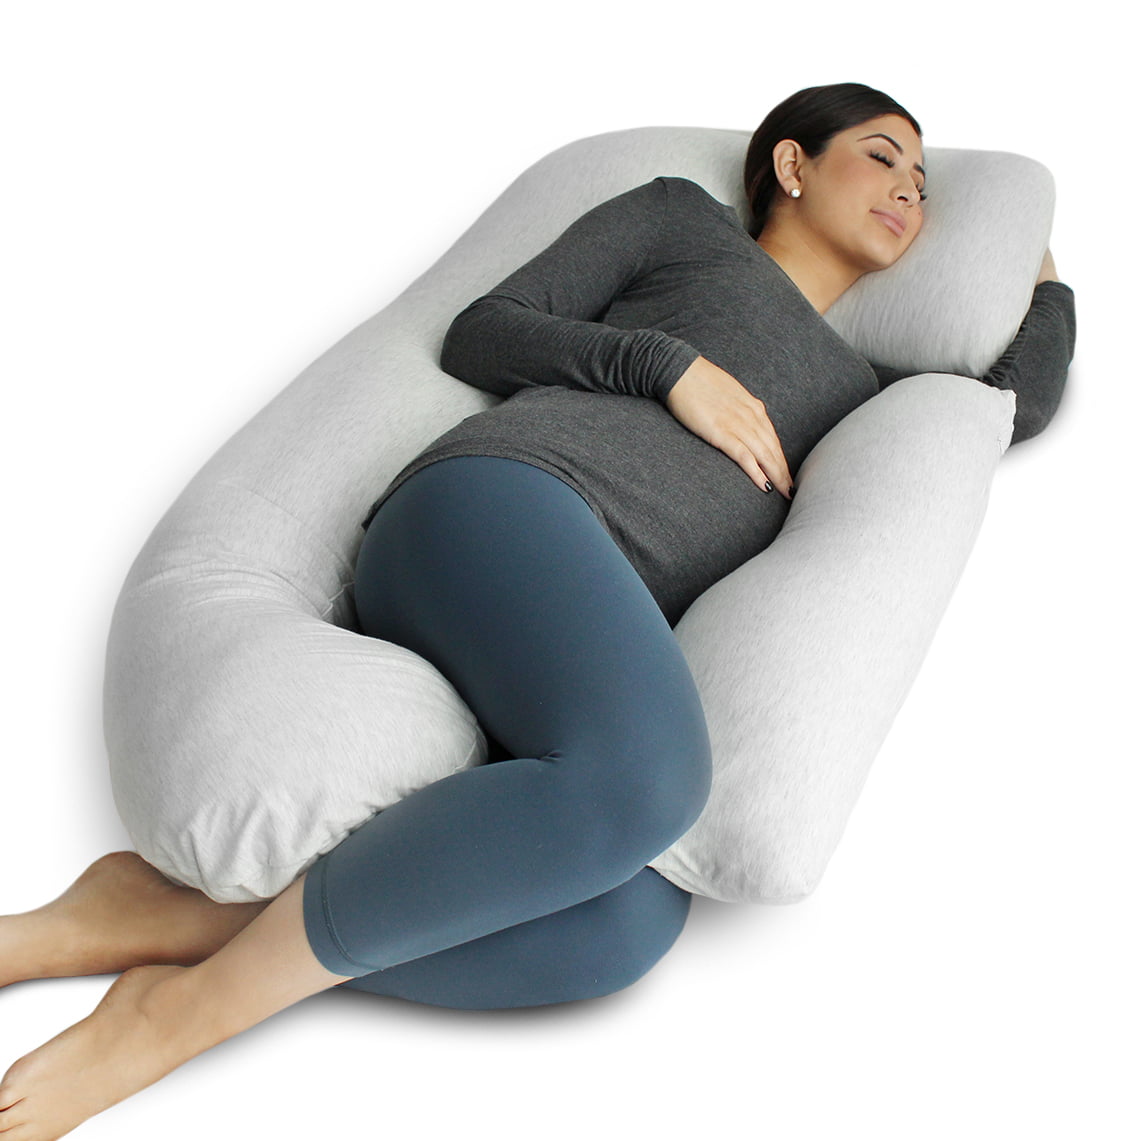 51" Pregnancy Pillow U-Shaped Full Body Pillow Maternity Support Bell 